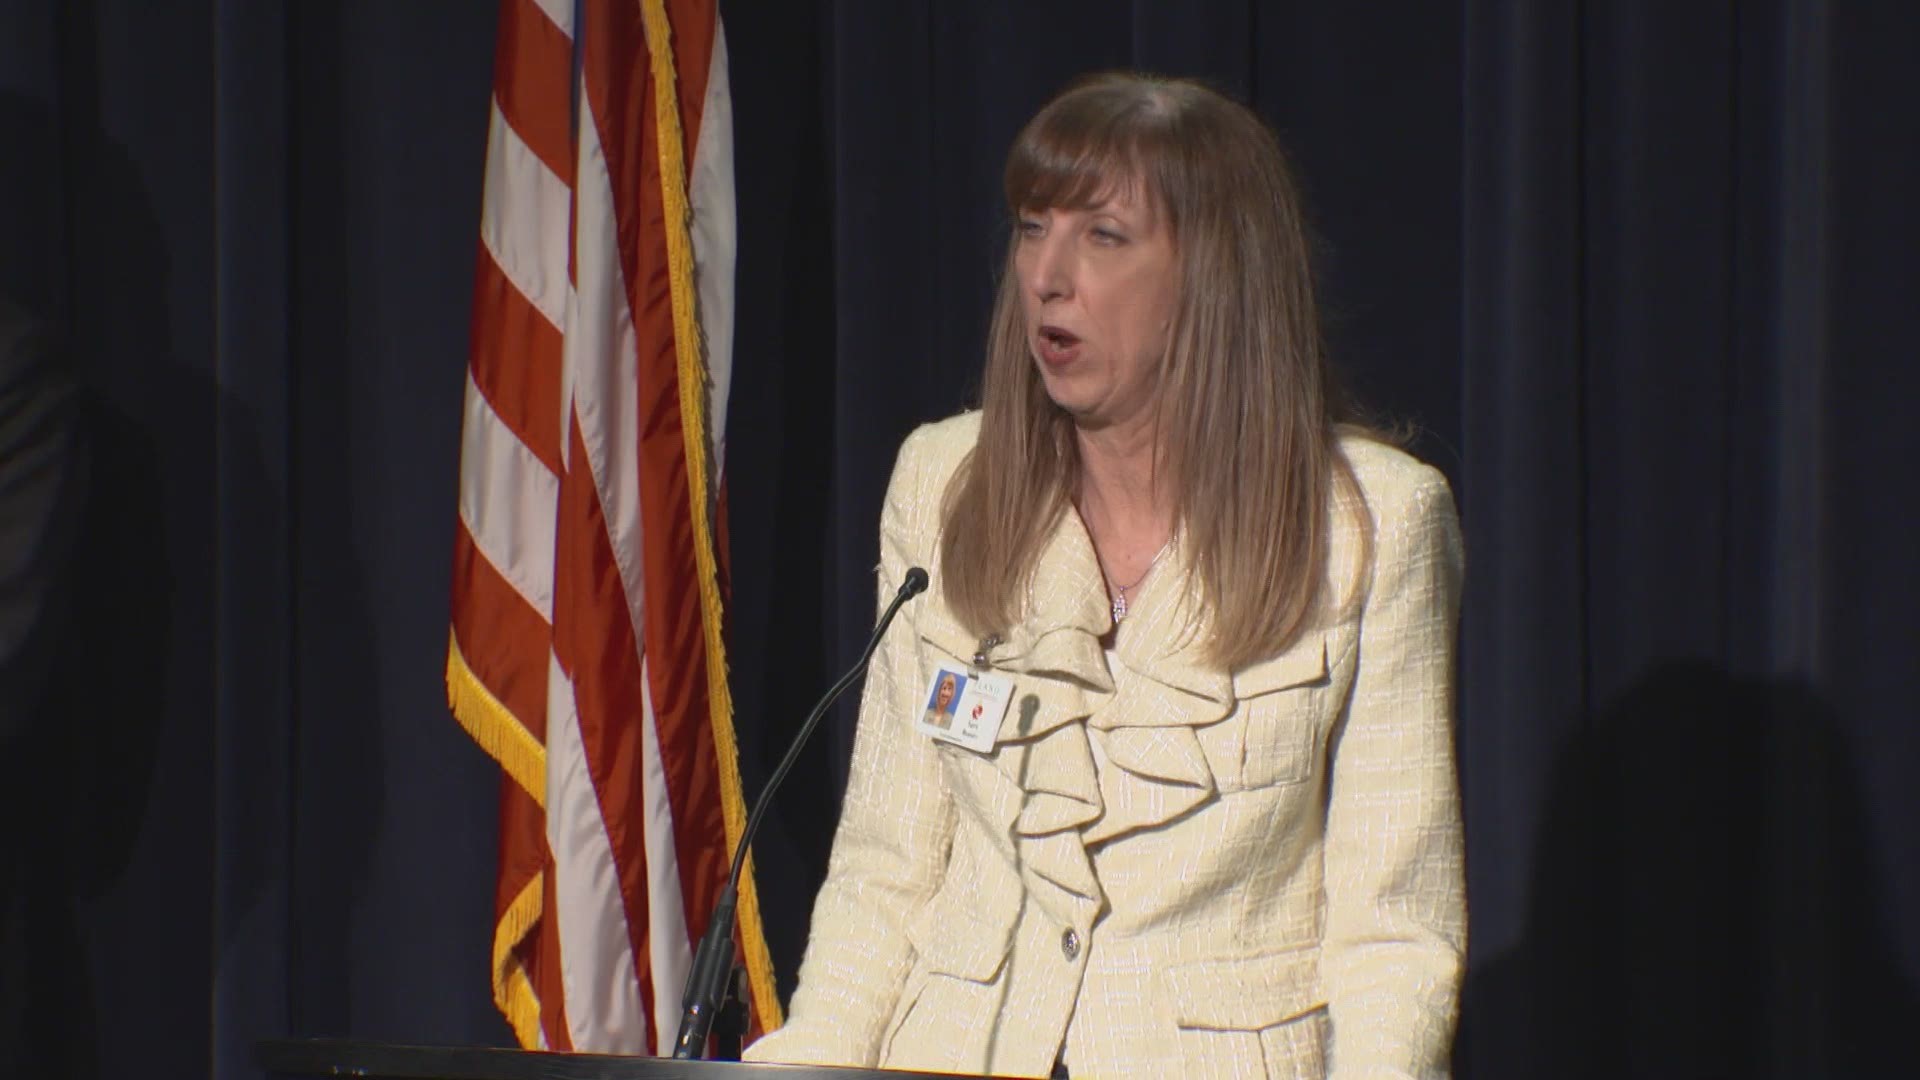 "If there are weaknesses in our systems or processes, I want to know," said Plano ISD Superintendent Sara Bonser.